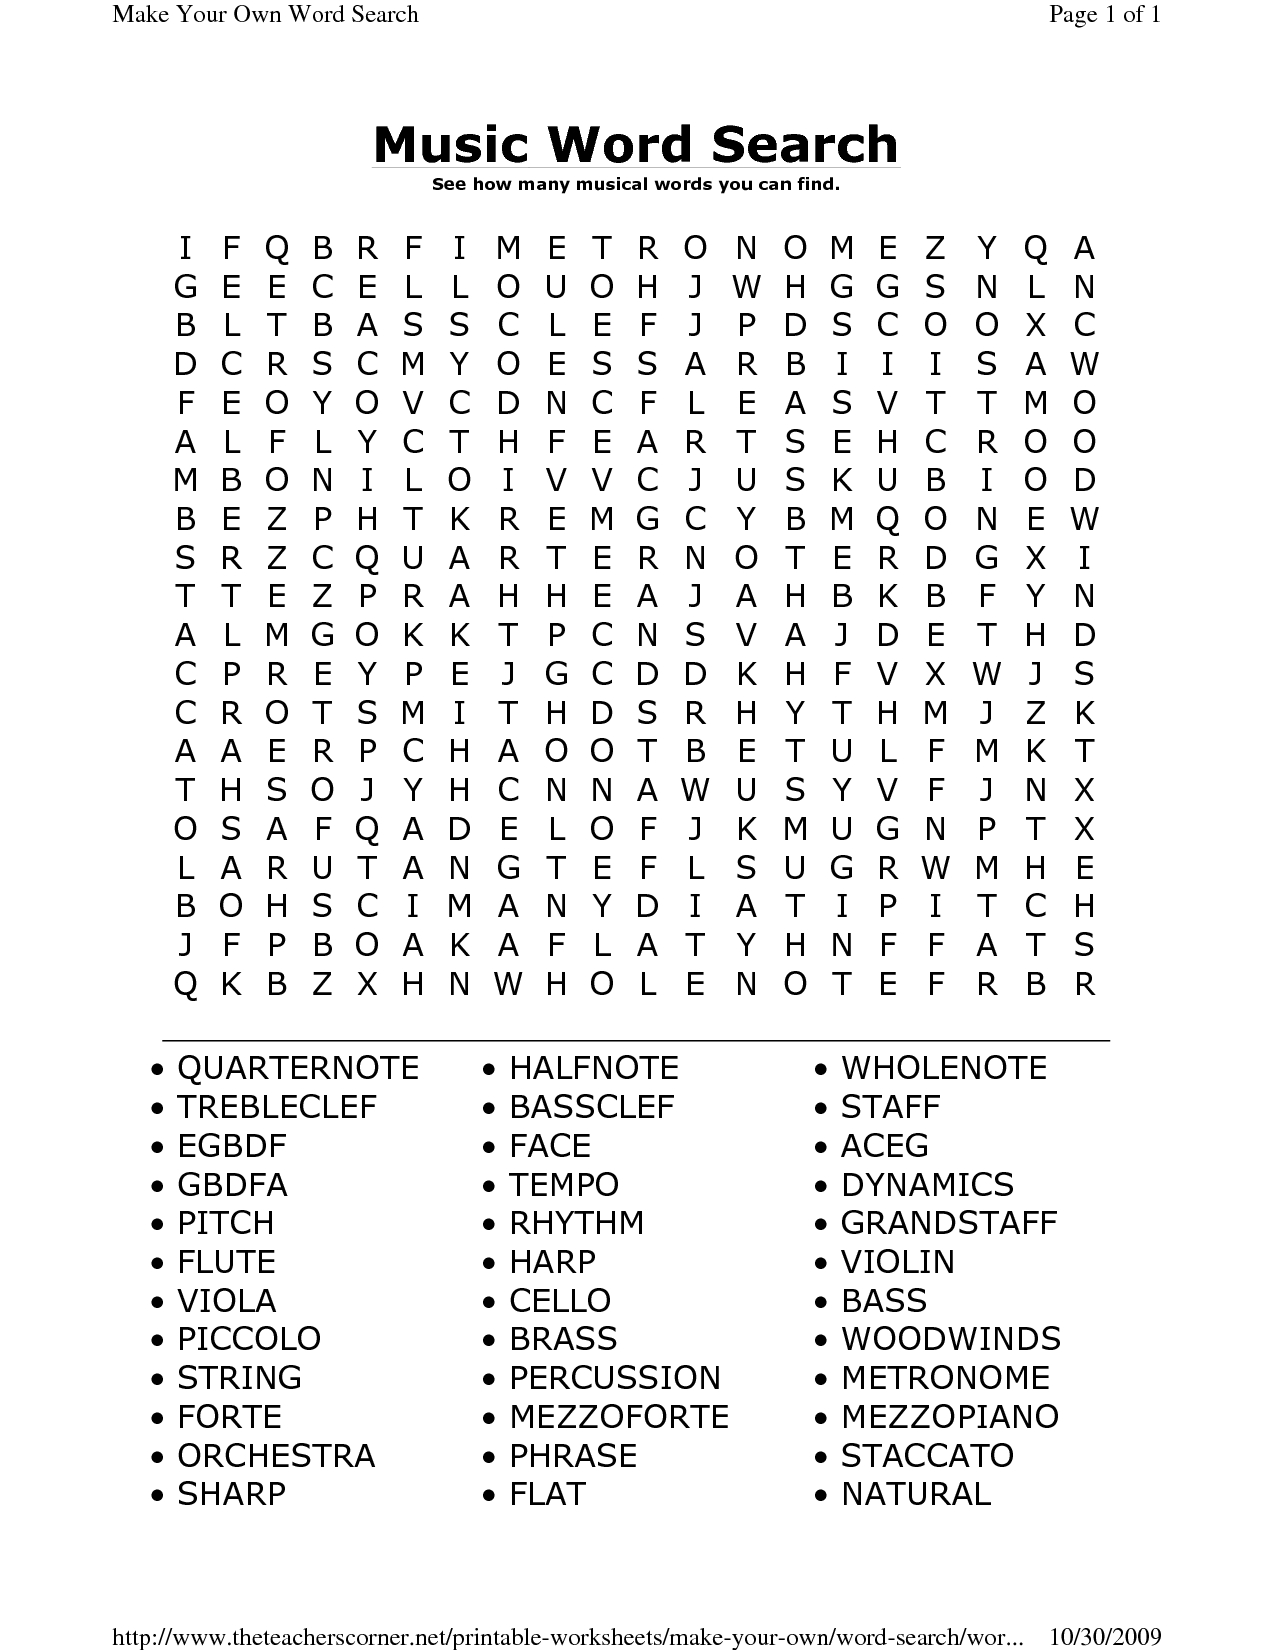 Printable Music Word Search Puzzles | Music Word Search | Word - Make Your Own Search Word Puzzle Free Printable